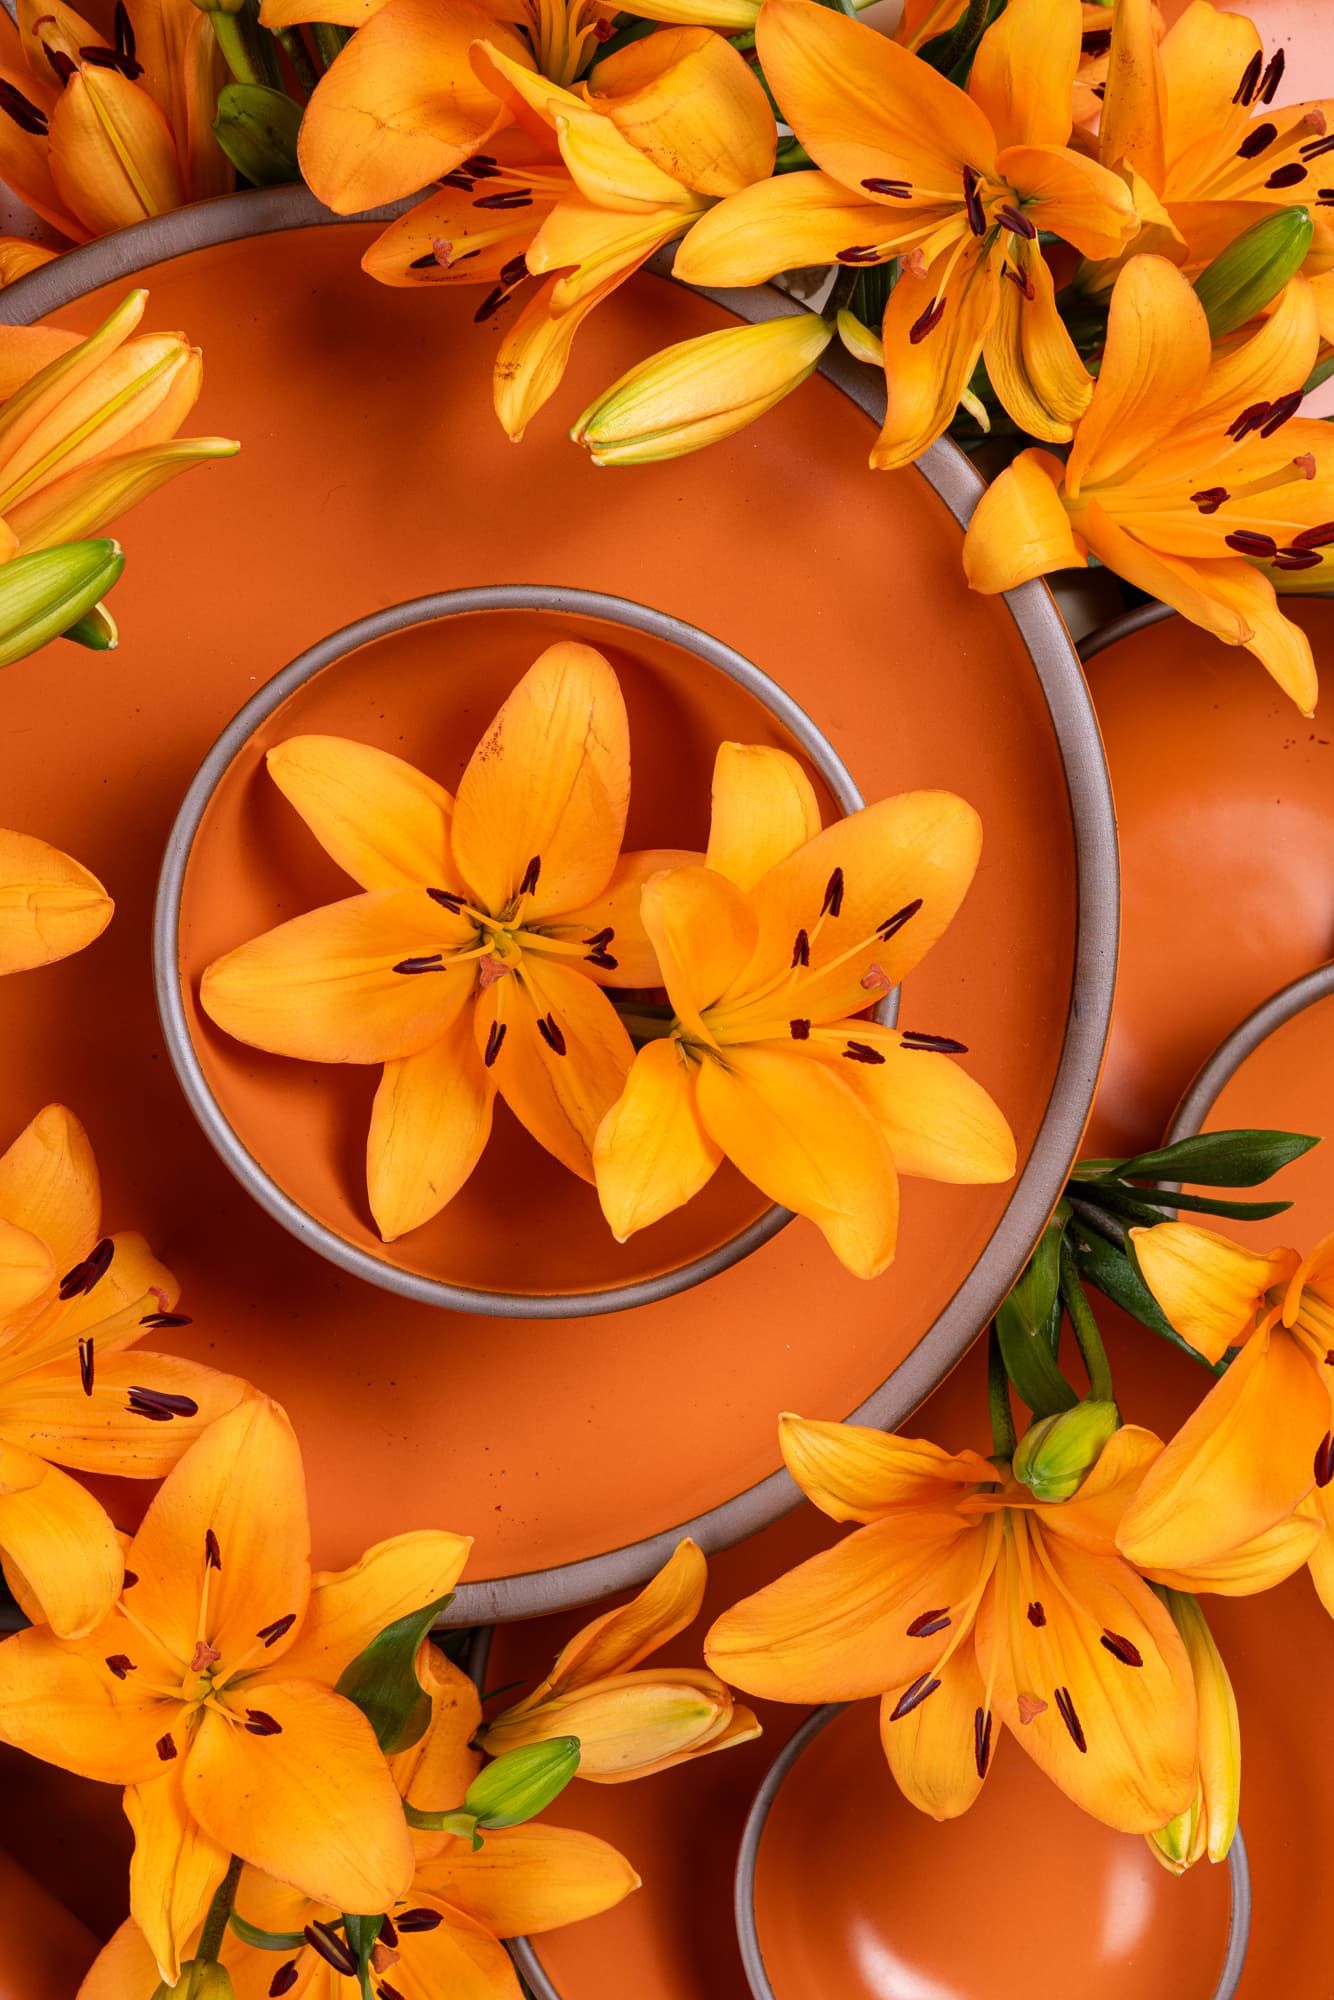 A close up of ceramic bowls and plates stacked together in a bold orange color with daylily flowers everywhere